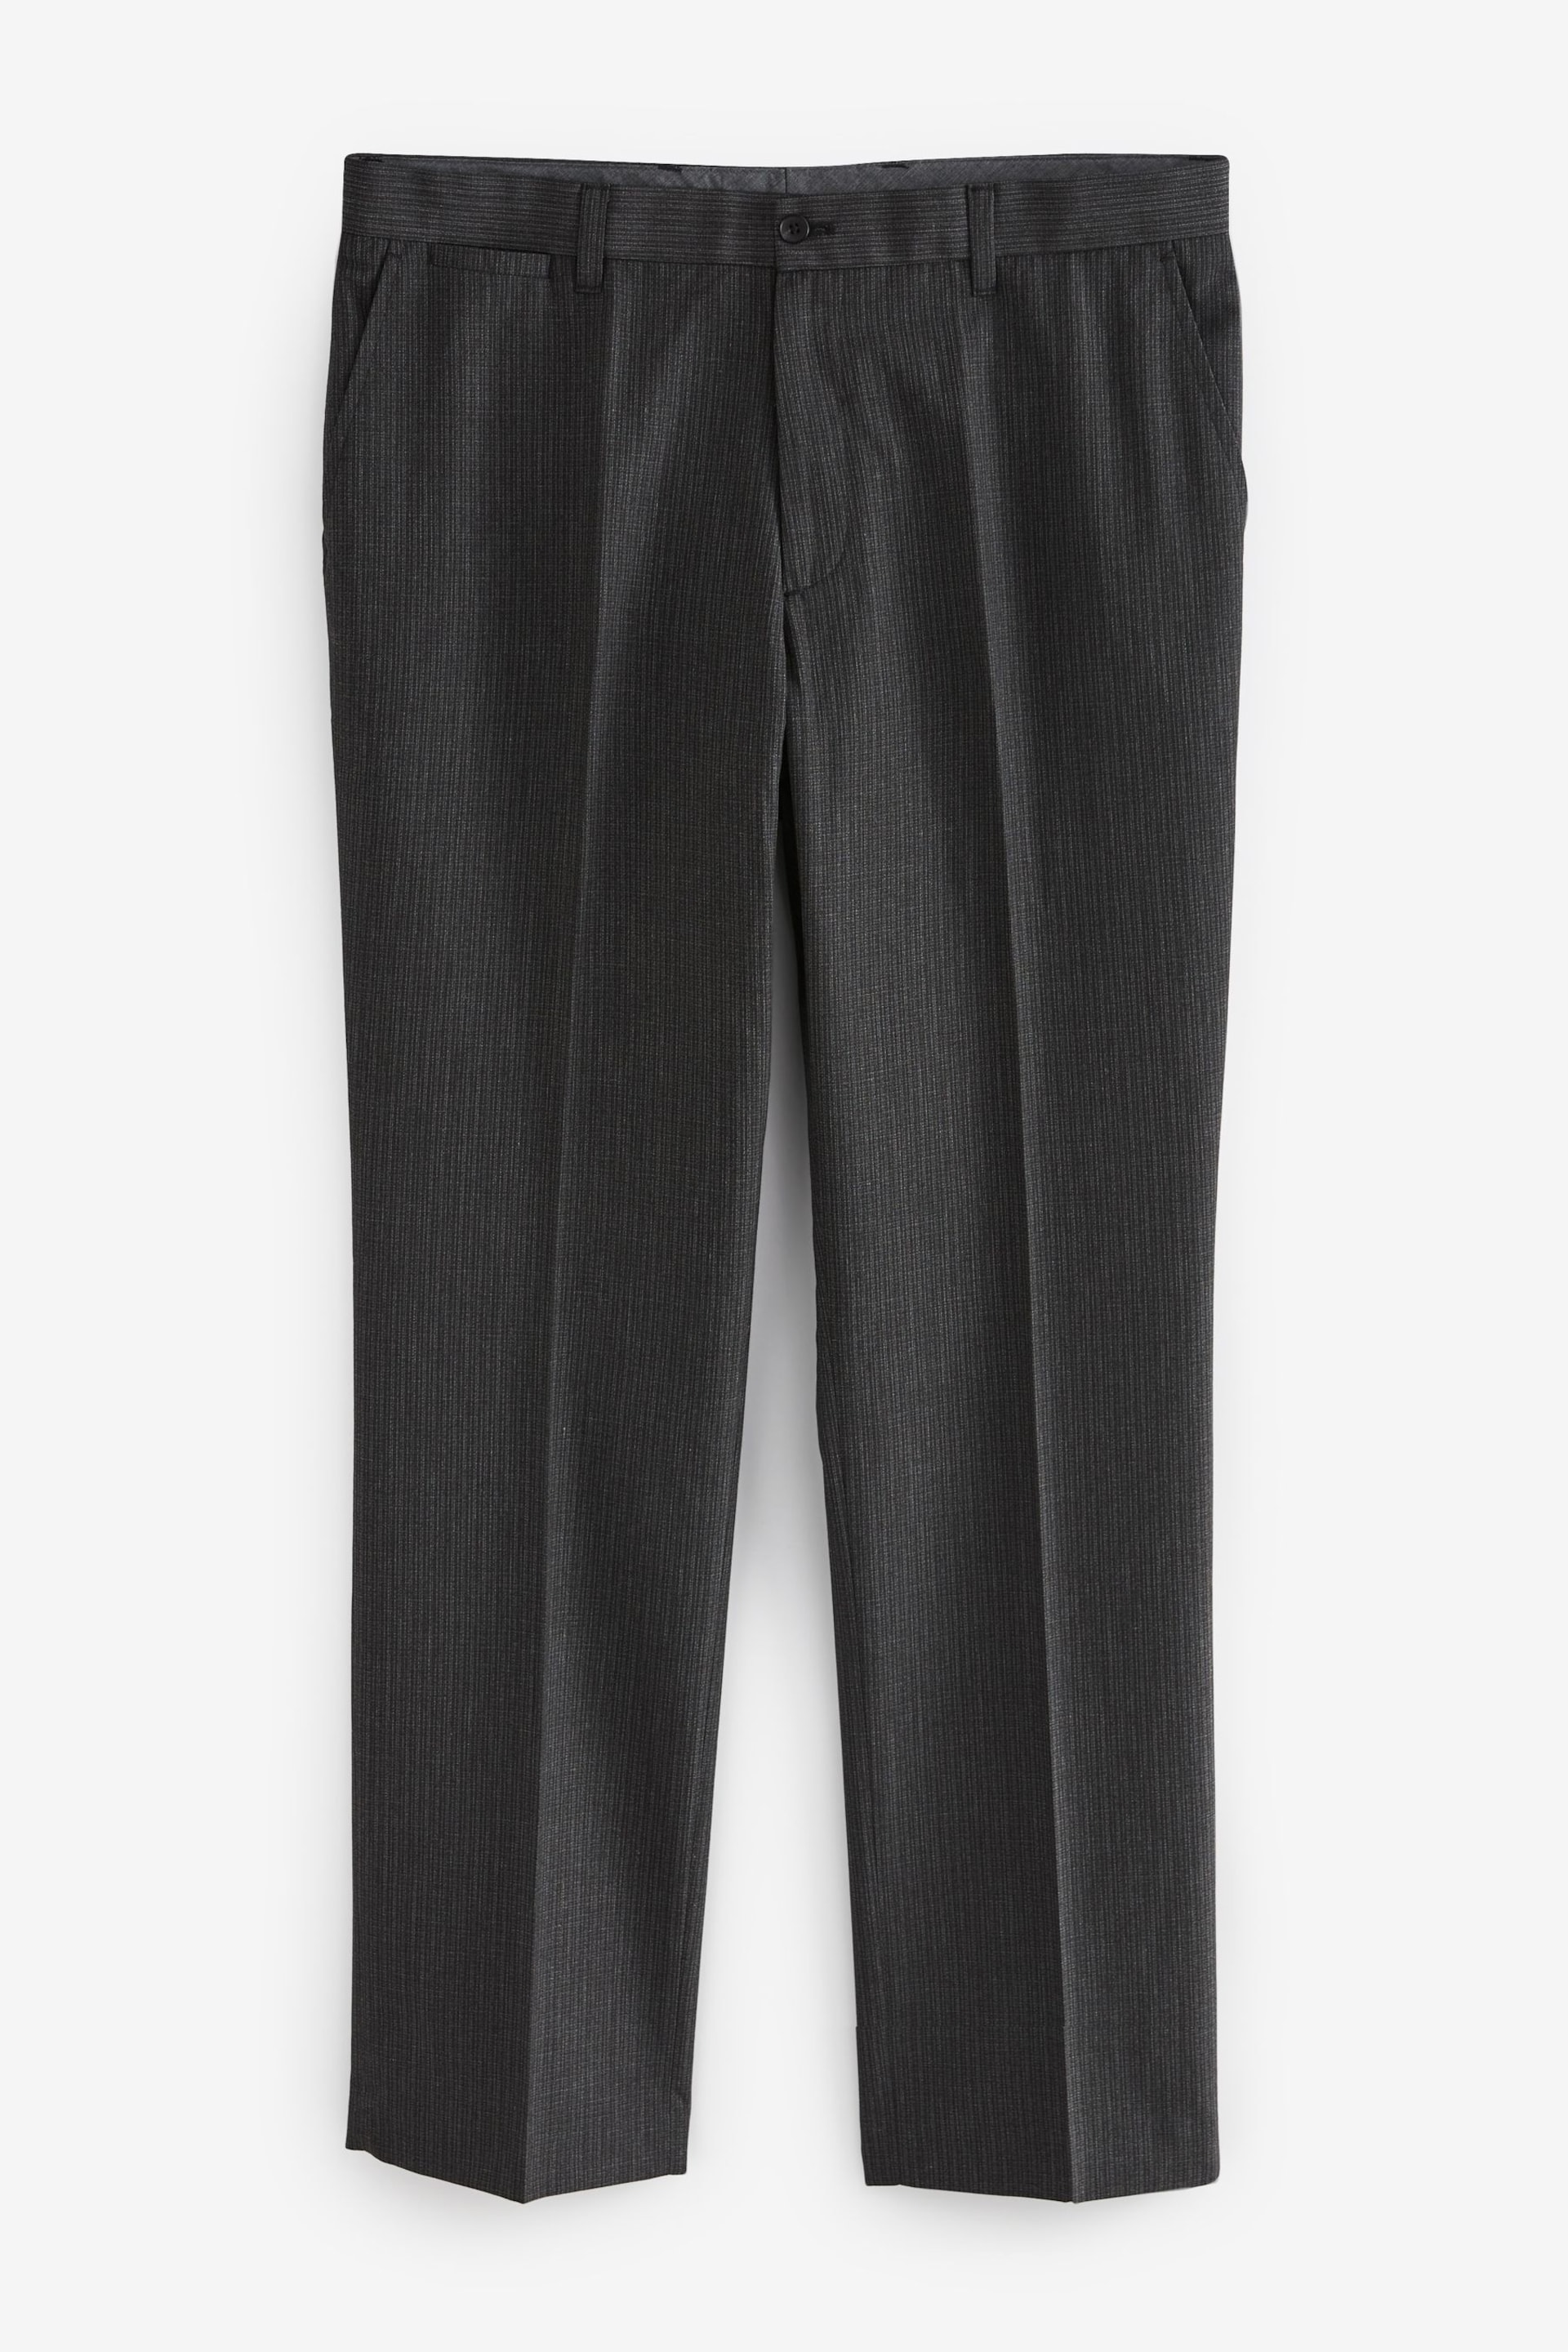 Charcoal Grey Textured Smart Trousers - Image 5 of 9